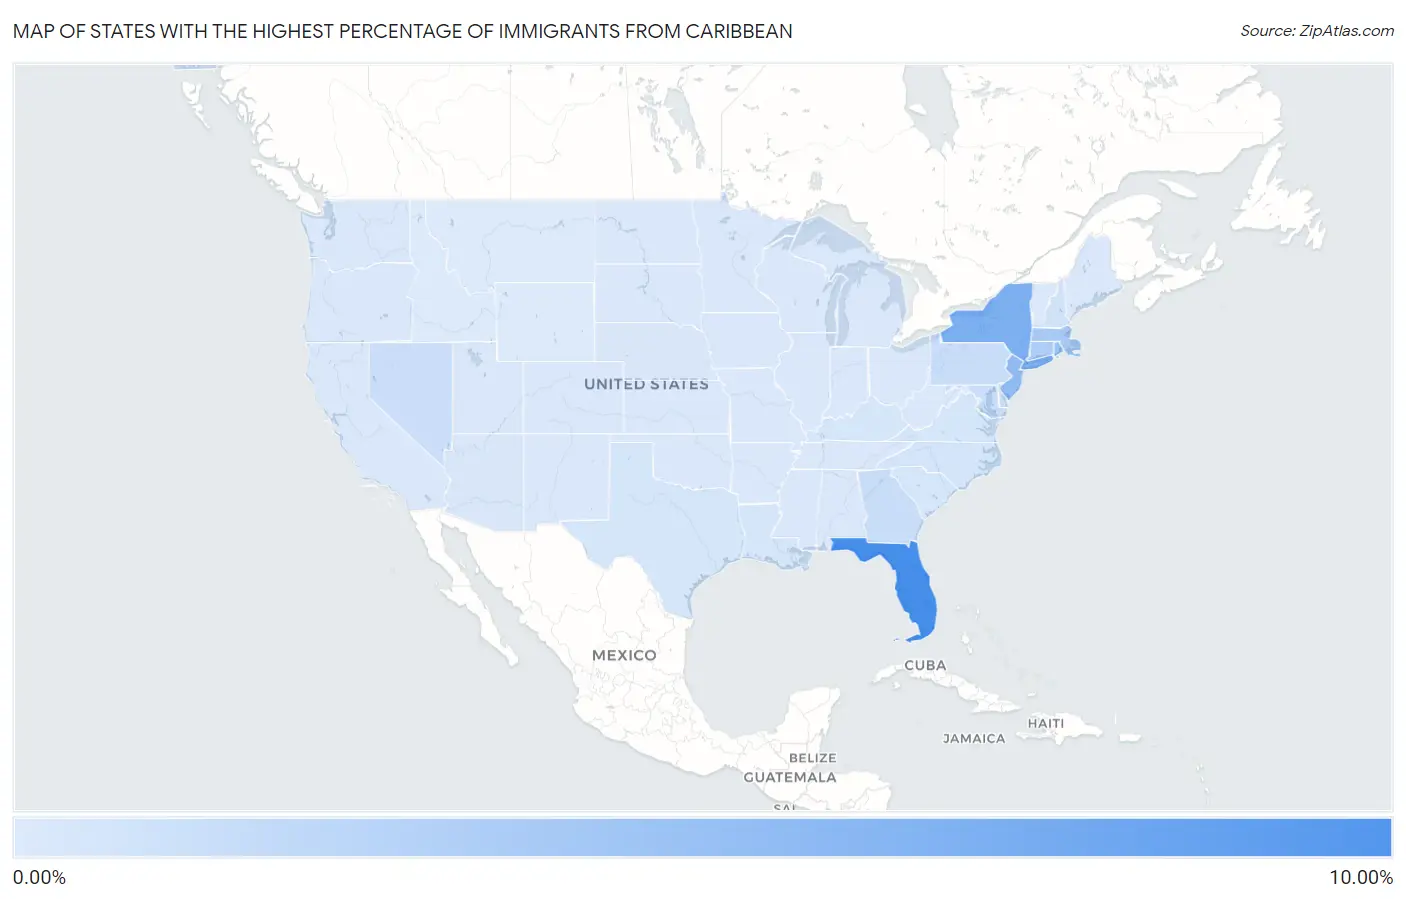 States with the Highest Percentage of Immigrants from Caribbean in the United States Map